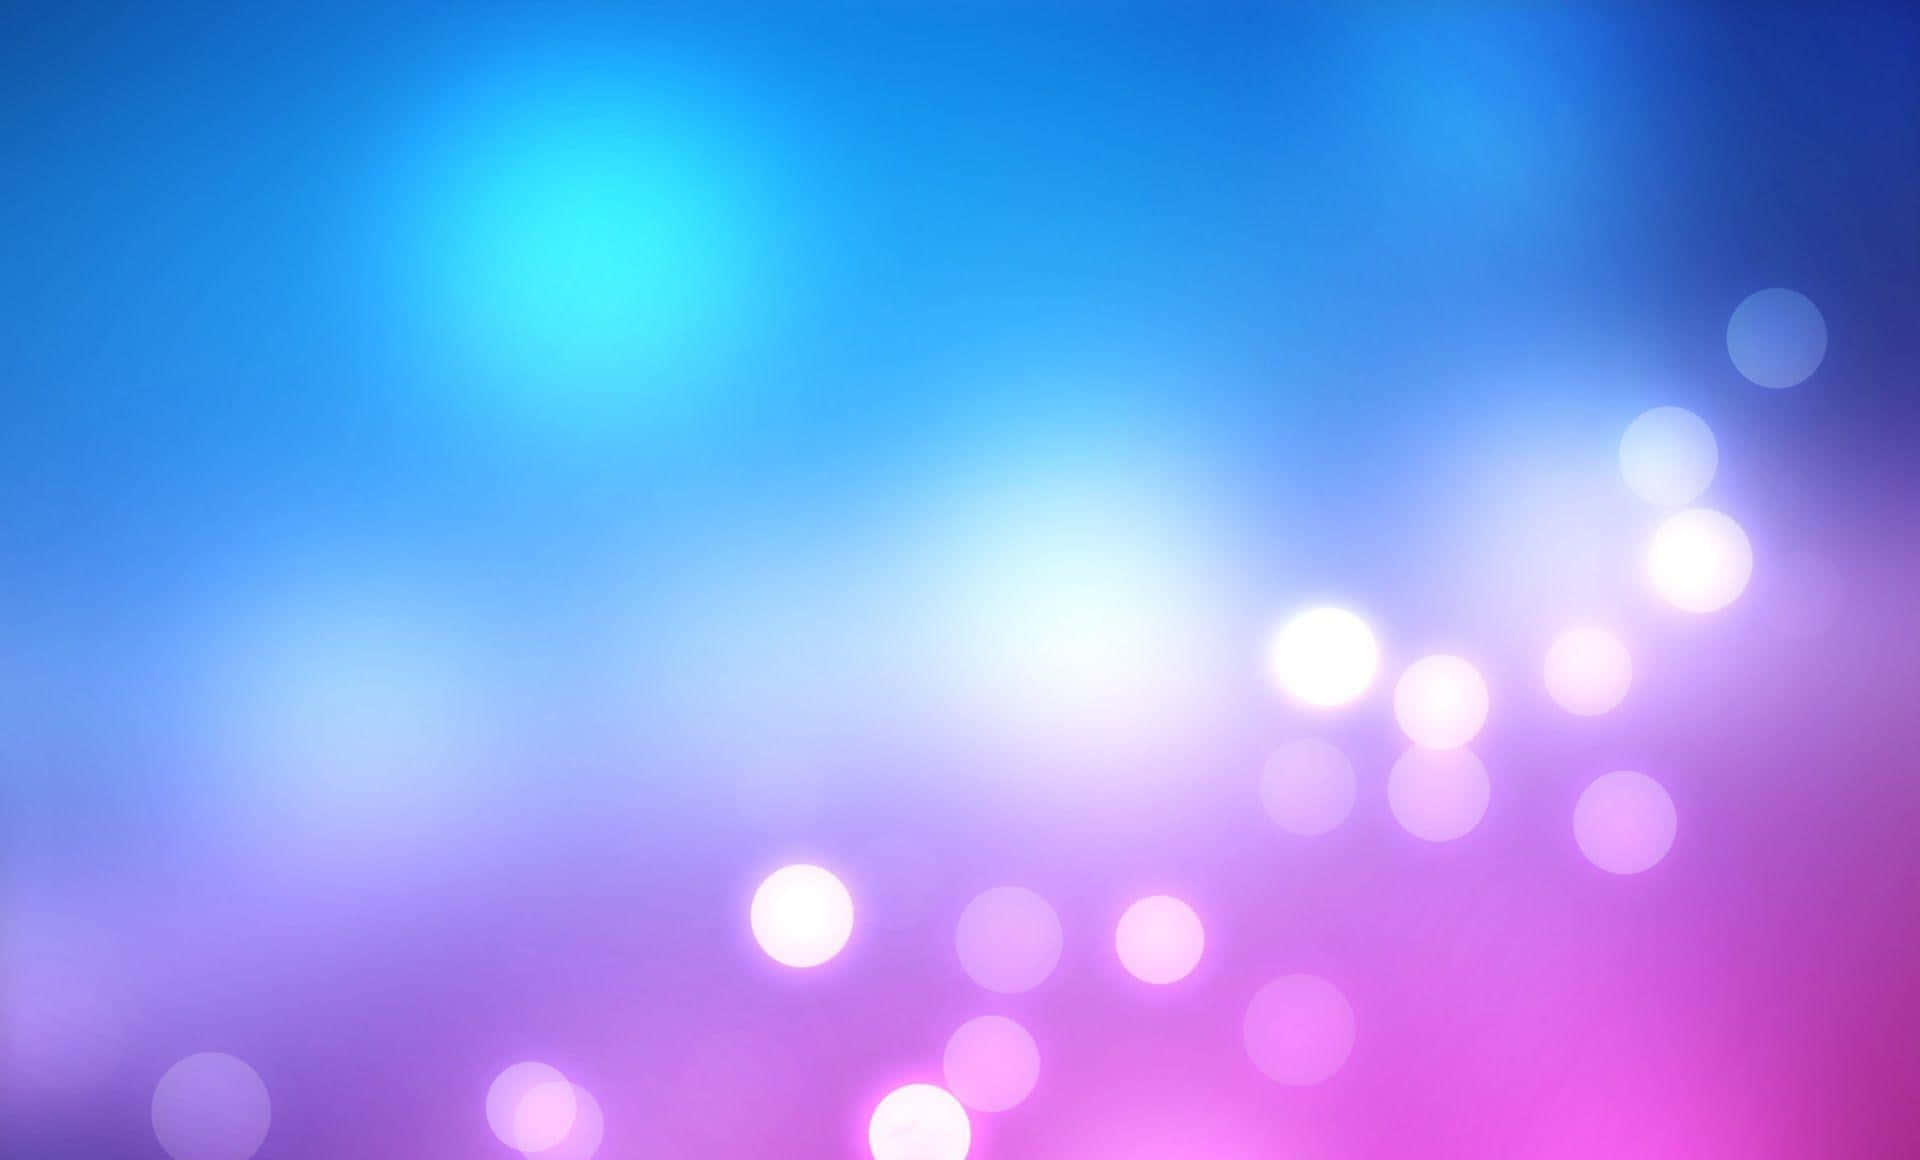 A captivating Pink and Blue gradient background